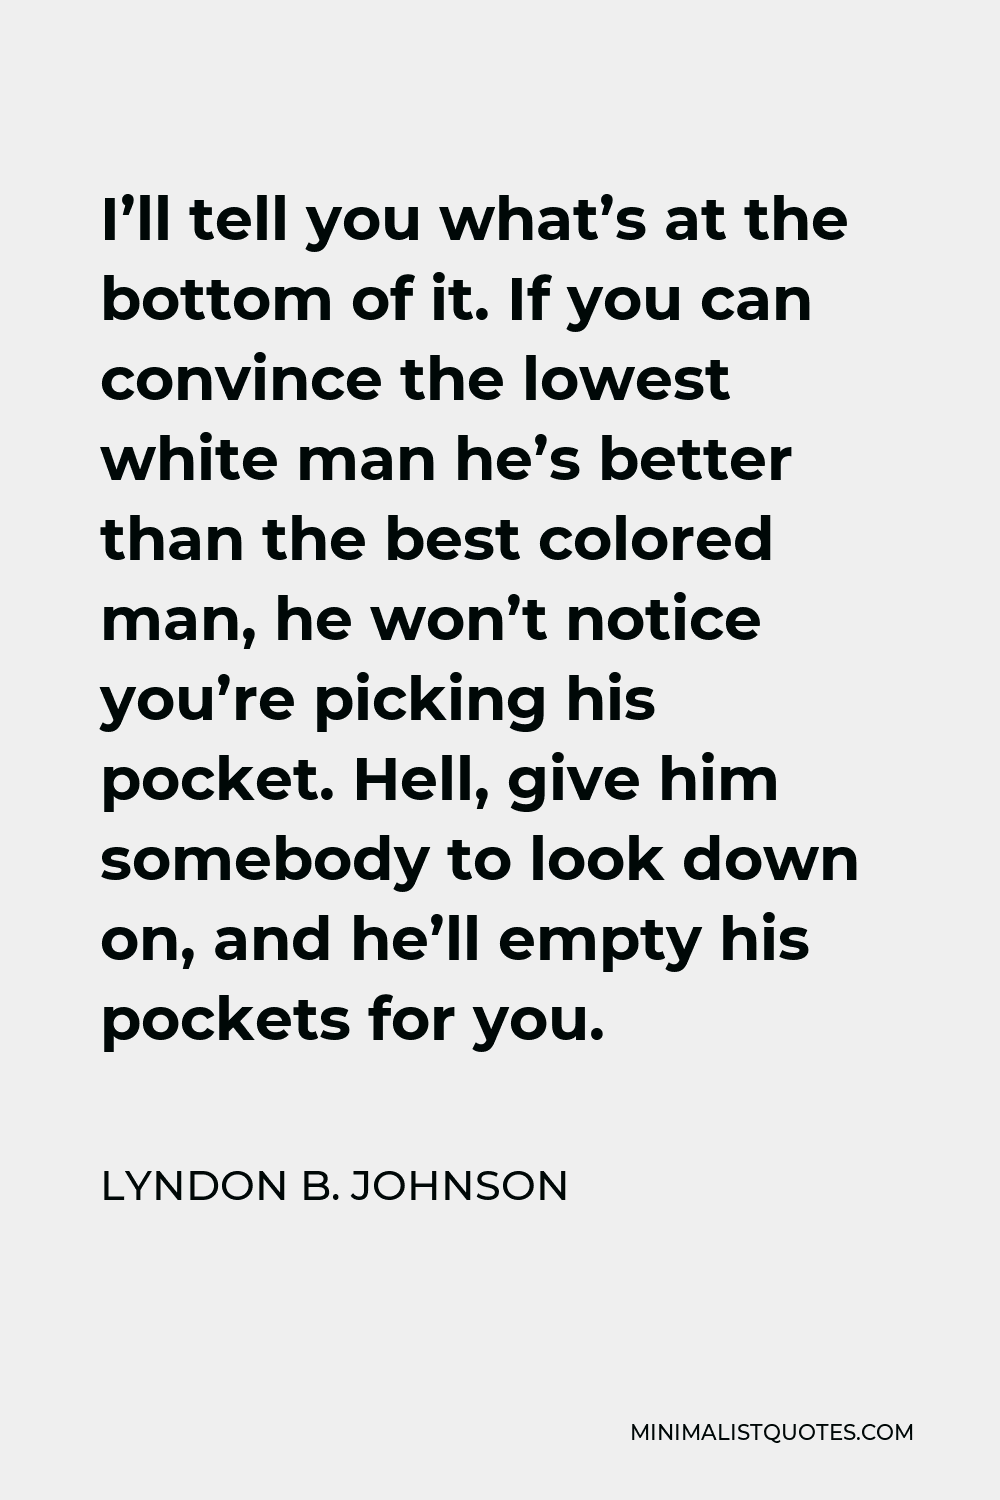 Lyndon B. Johnson Quote - I’ll tell you what’s at the bottom of it. If you can convince the lowest white man he’s better than the best colored man, he won’t notice you’re picking his pocket. Hell, give him somebody to look down on, and he’ll empty his pockets for you.